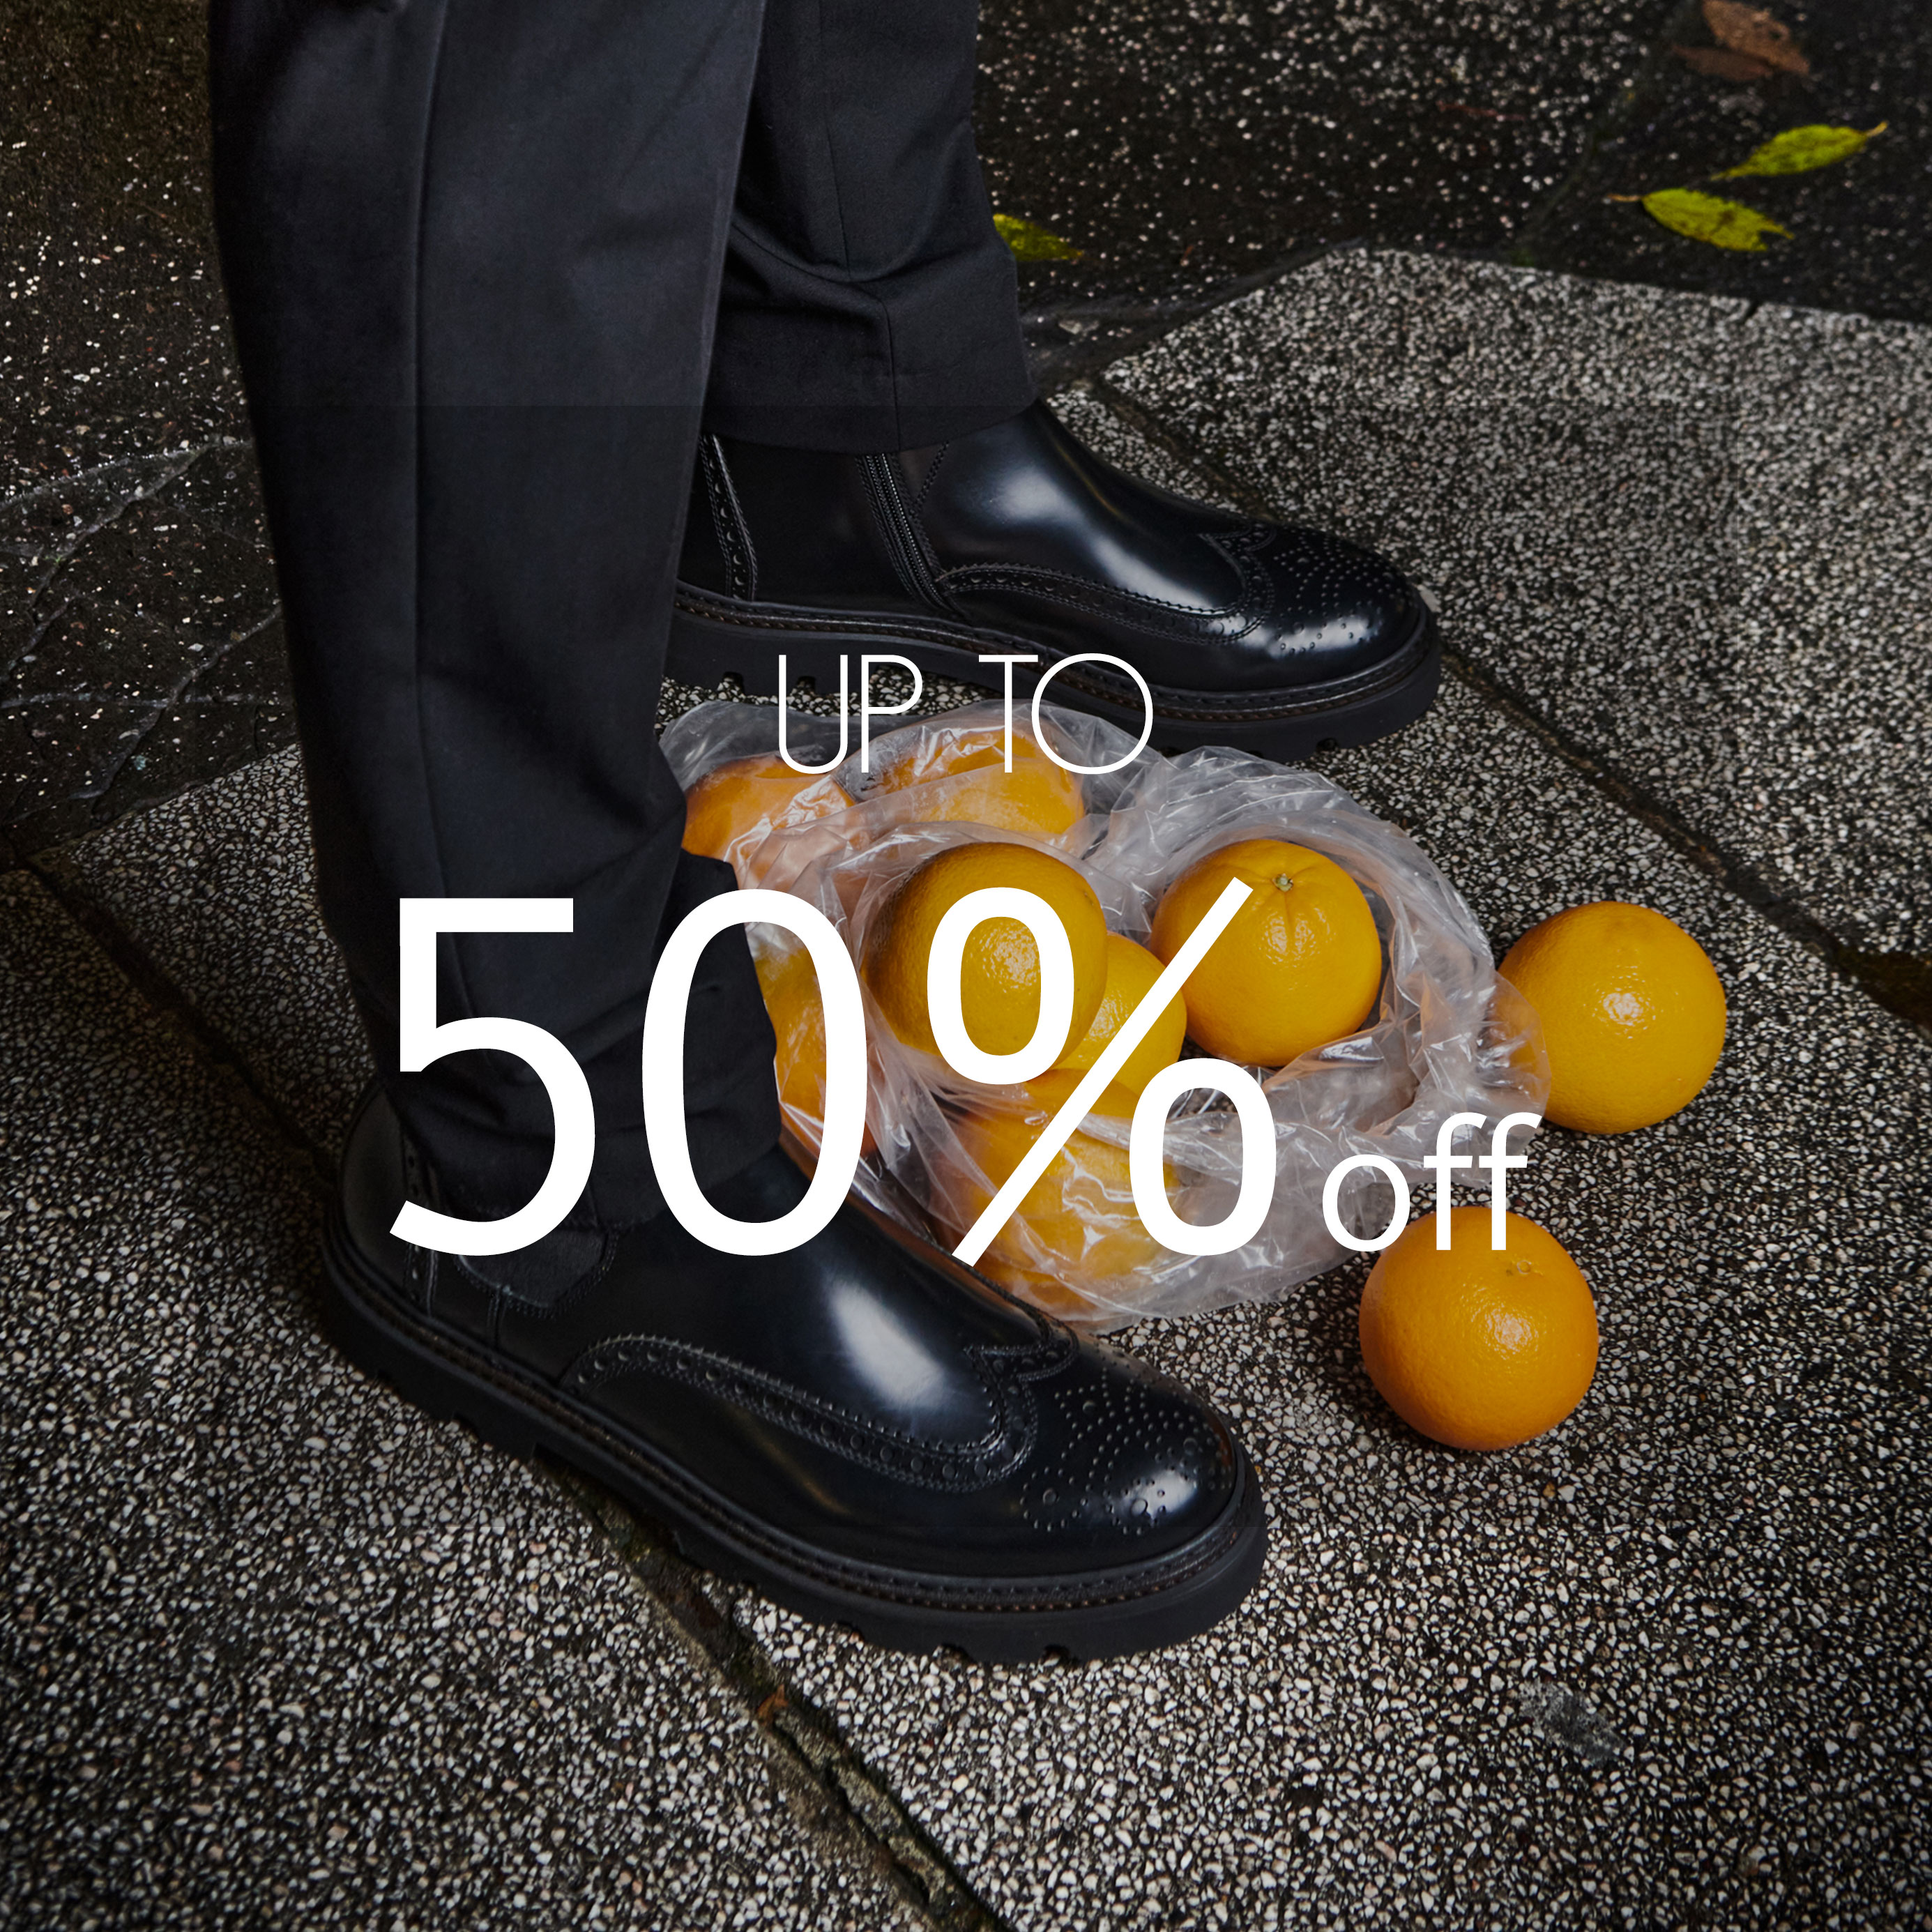 SALE! Up to 50% off 